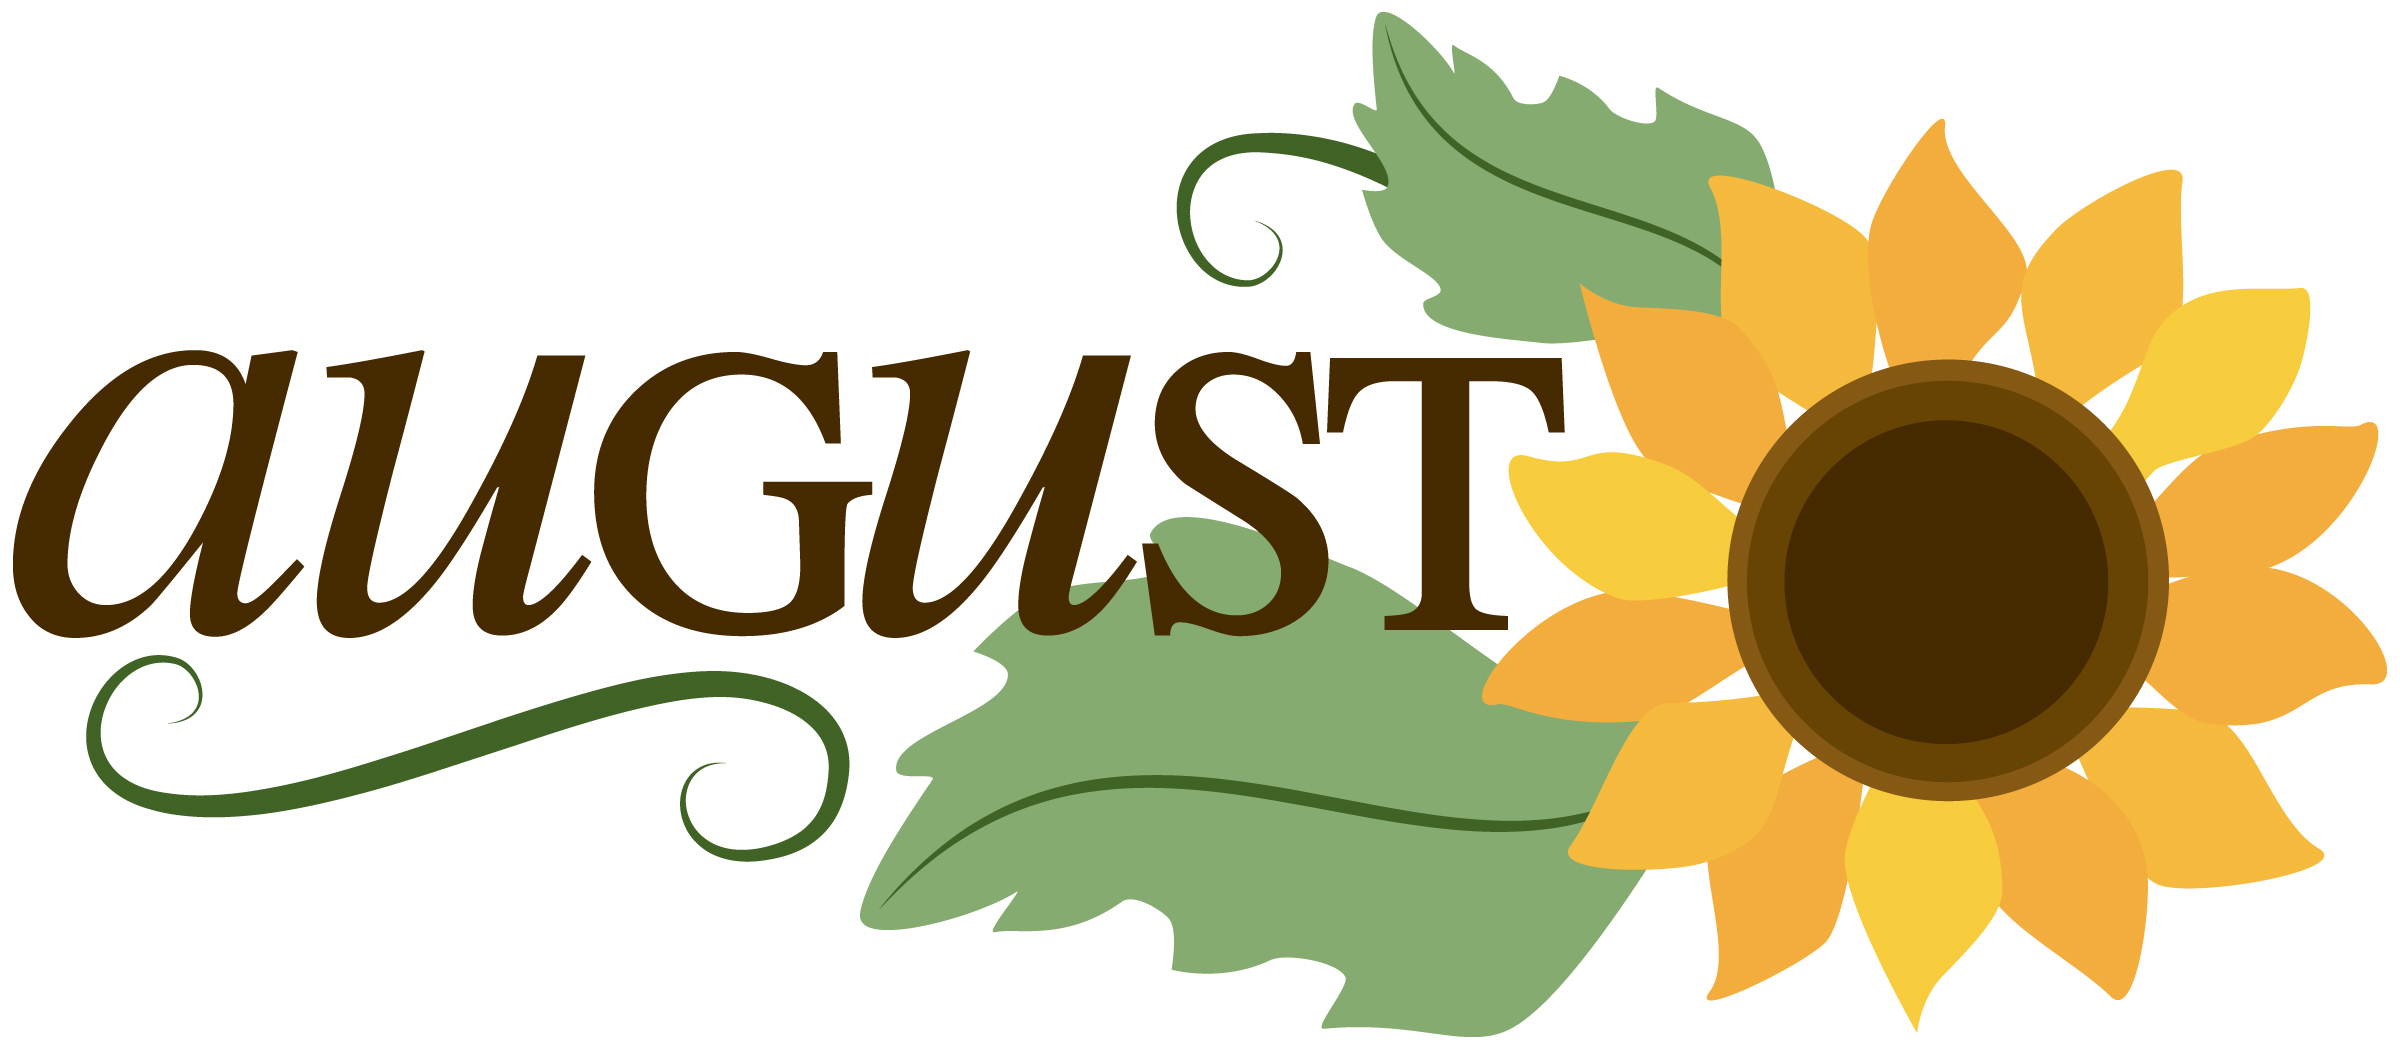 august-clipart-at-getdrawings-free-download